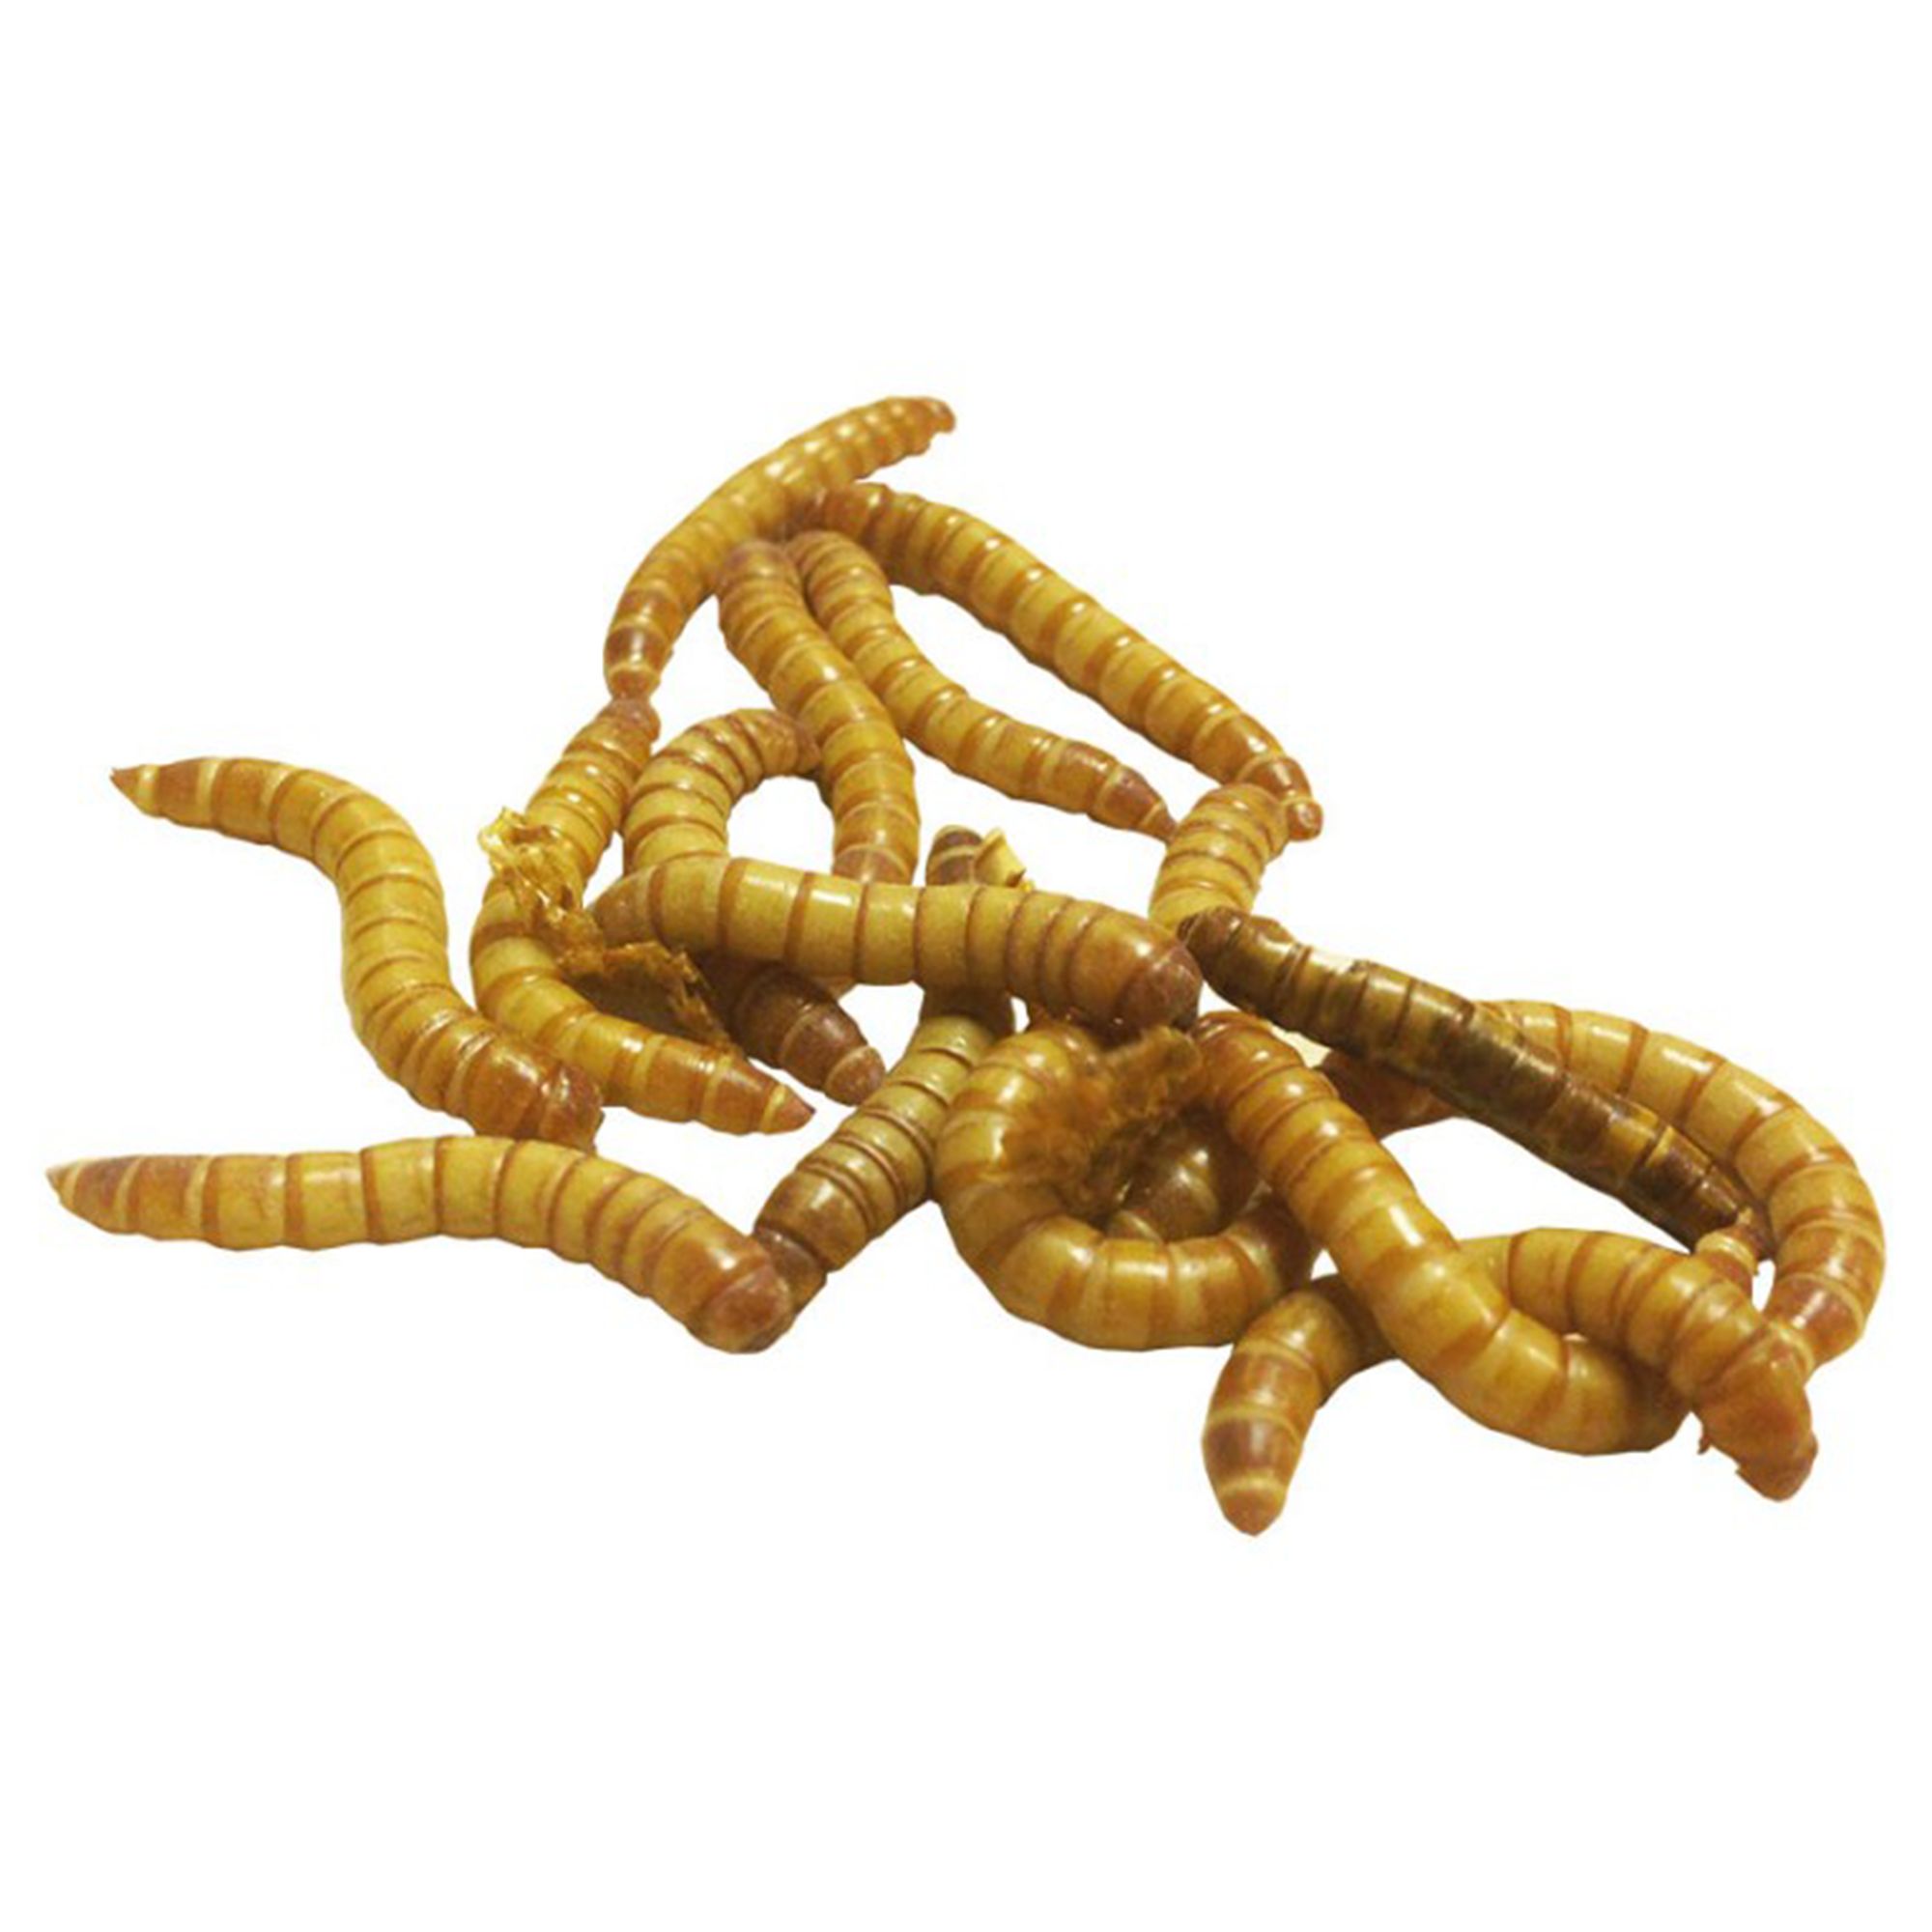 Live Regular Mealworms | reptile Food 